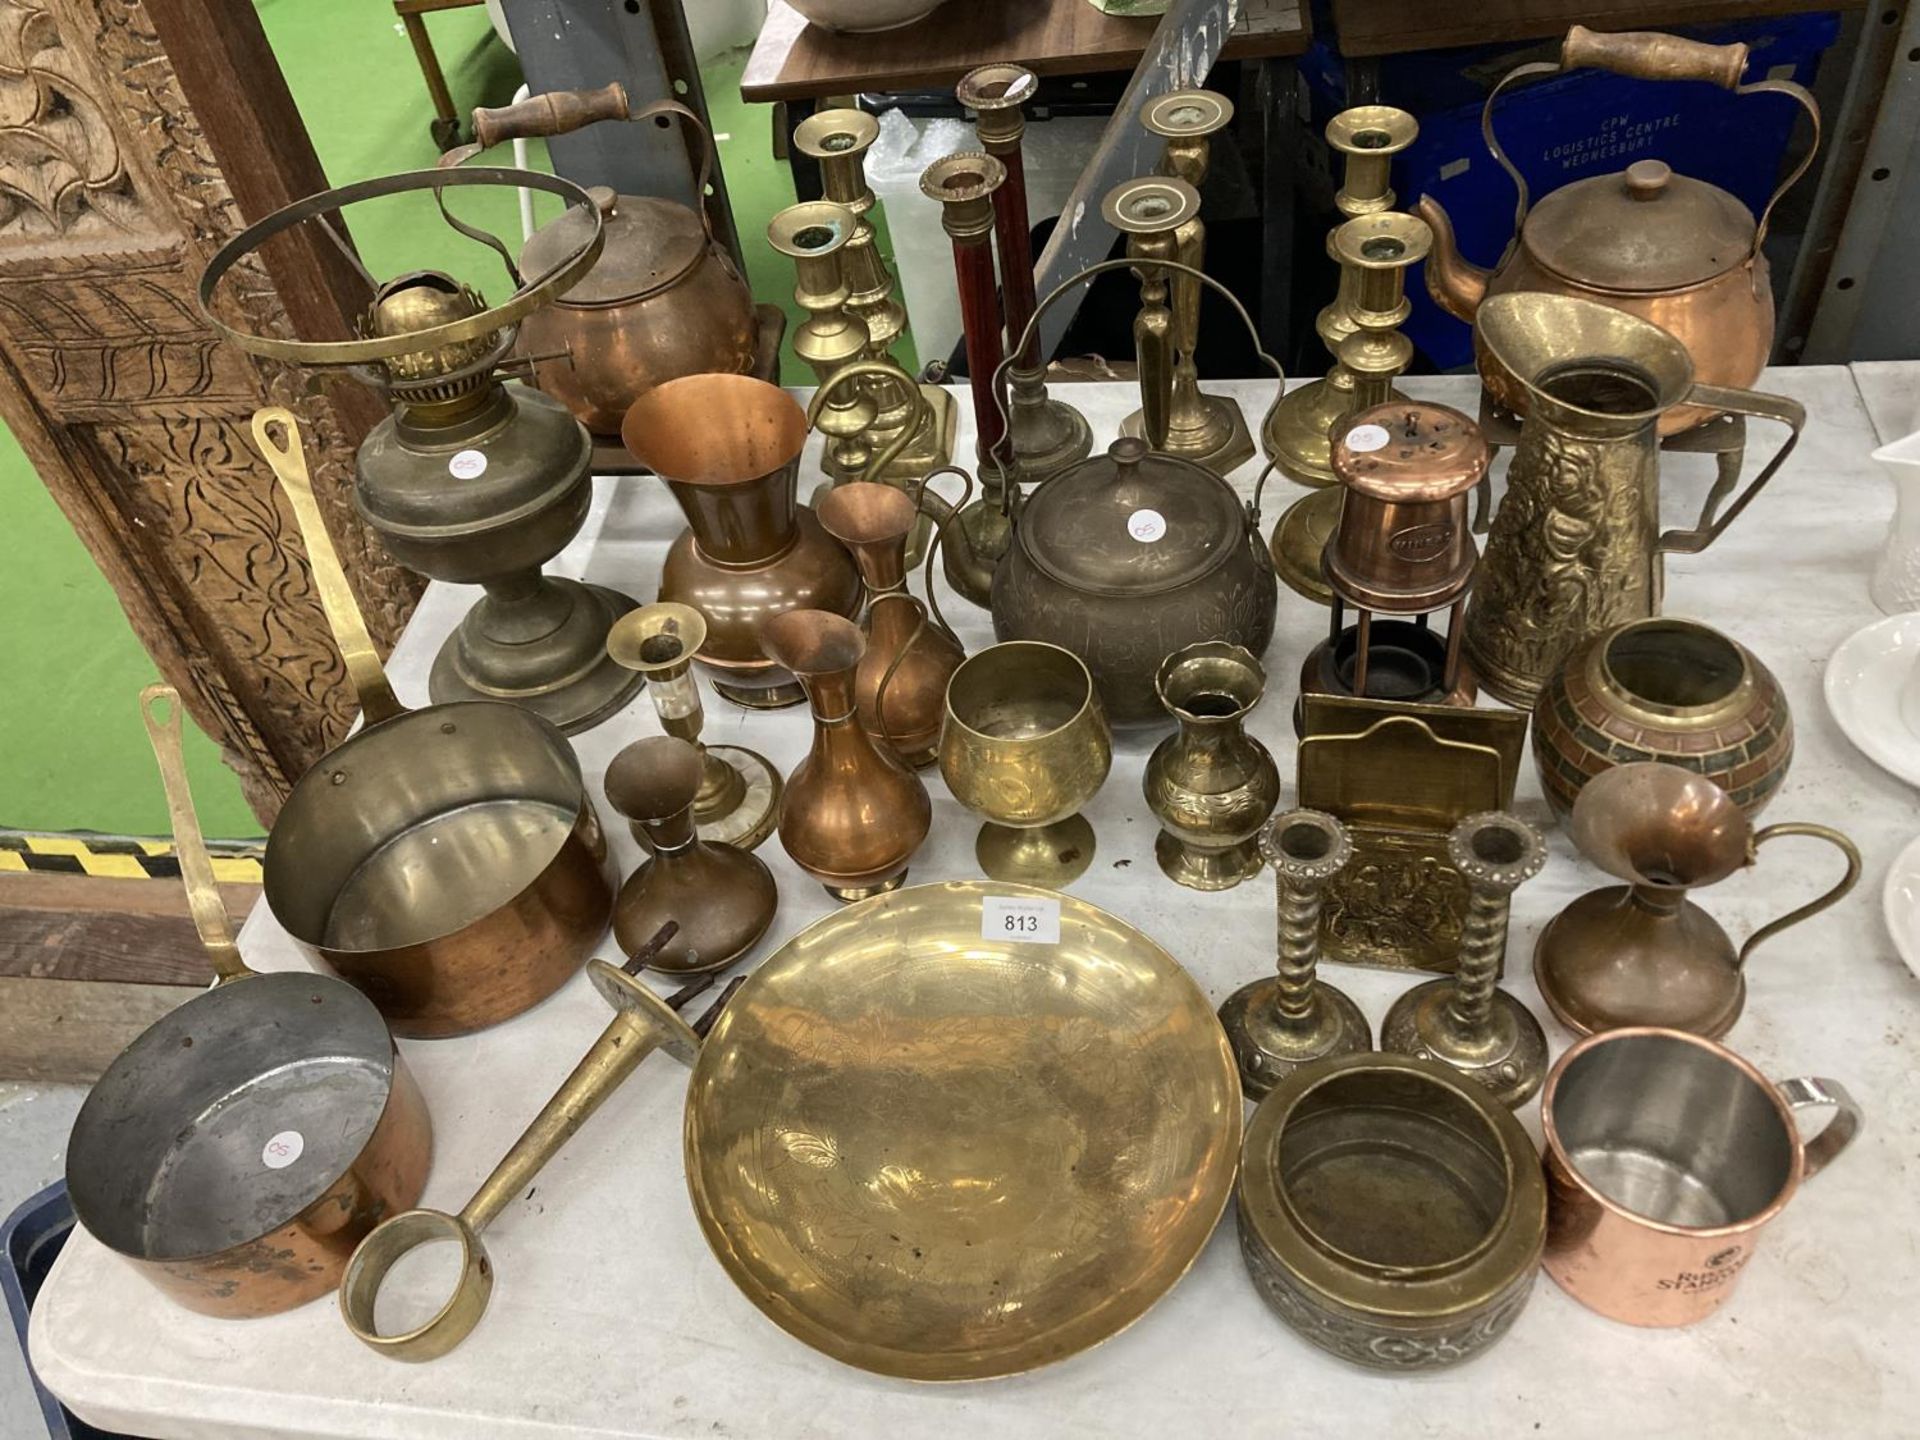 A LARGE QUANTITY OF BRASS AND COPPER ITEMS TO INCLUDE PANS, COPPER KETTLES AND STANDS, CANDLESTICKS,